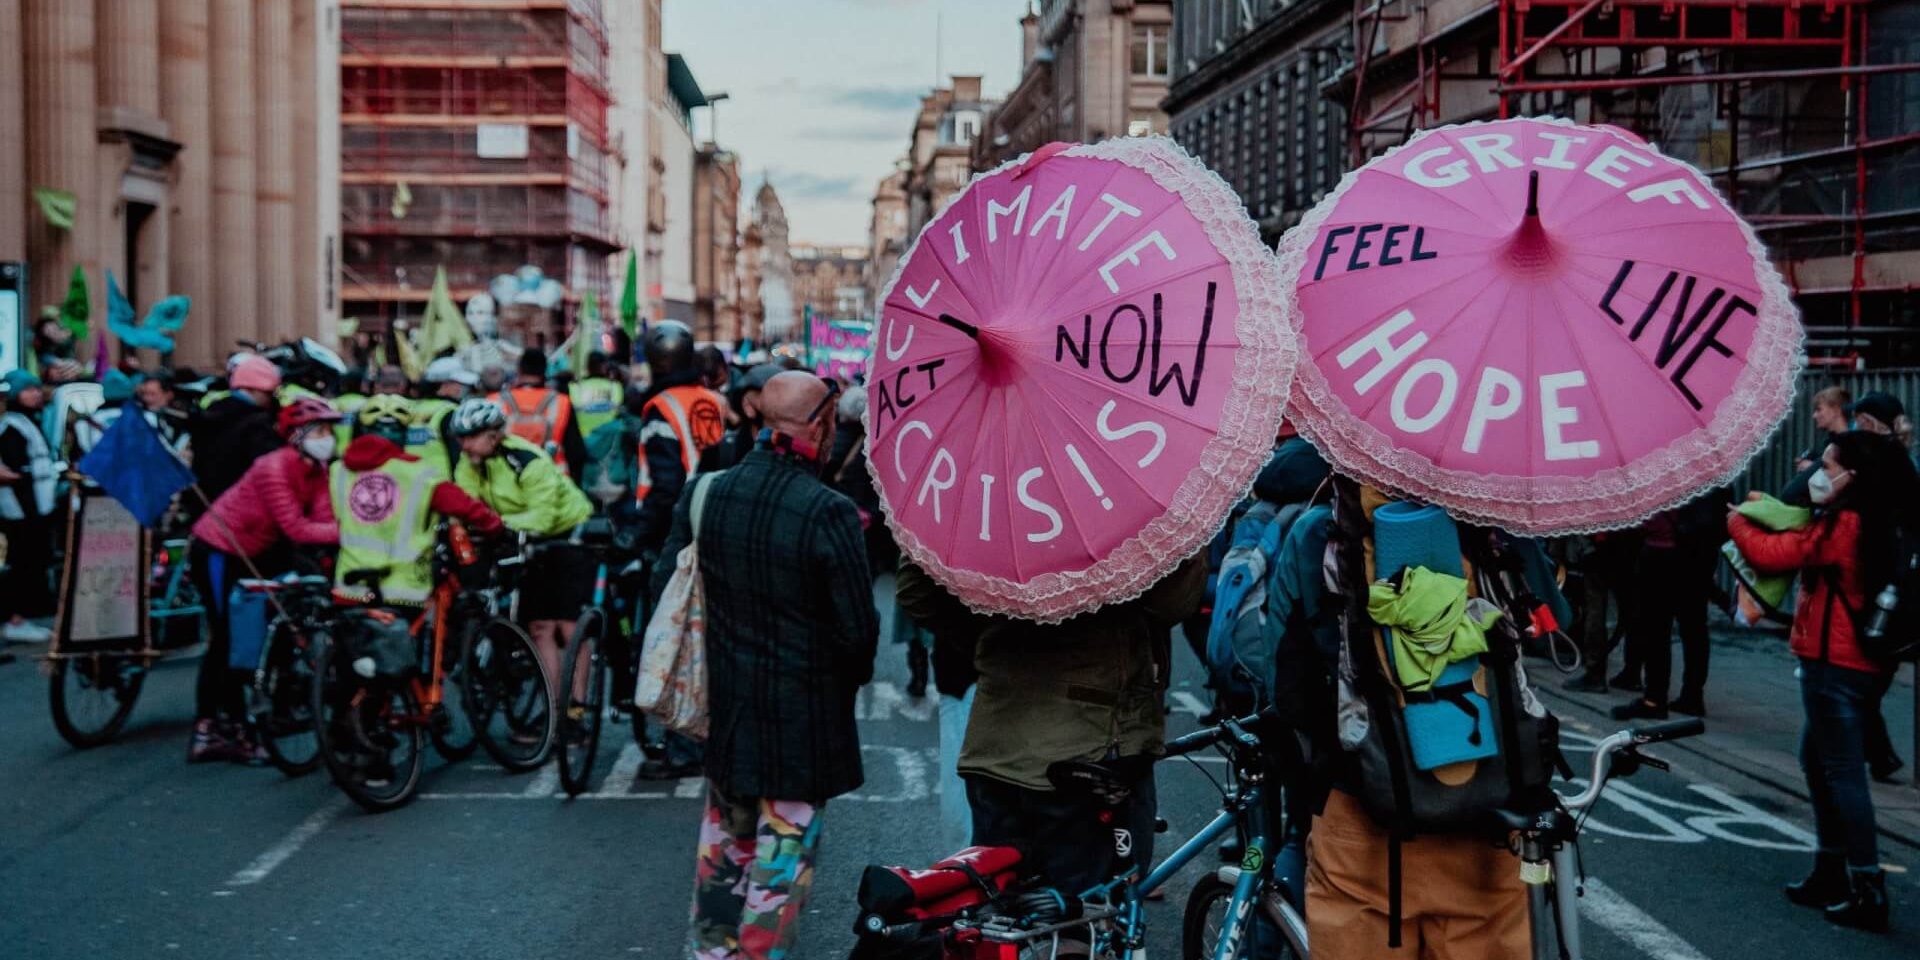 Protestors in Glasgow with painted umbrellas that read "climate crisis- act now"